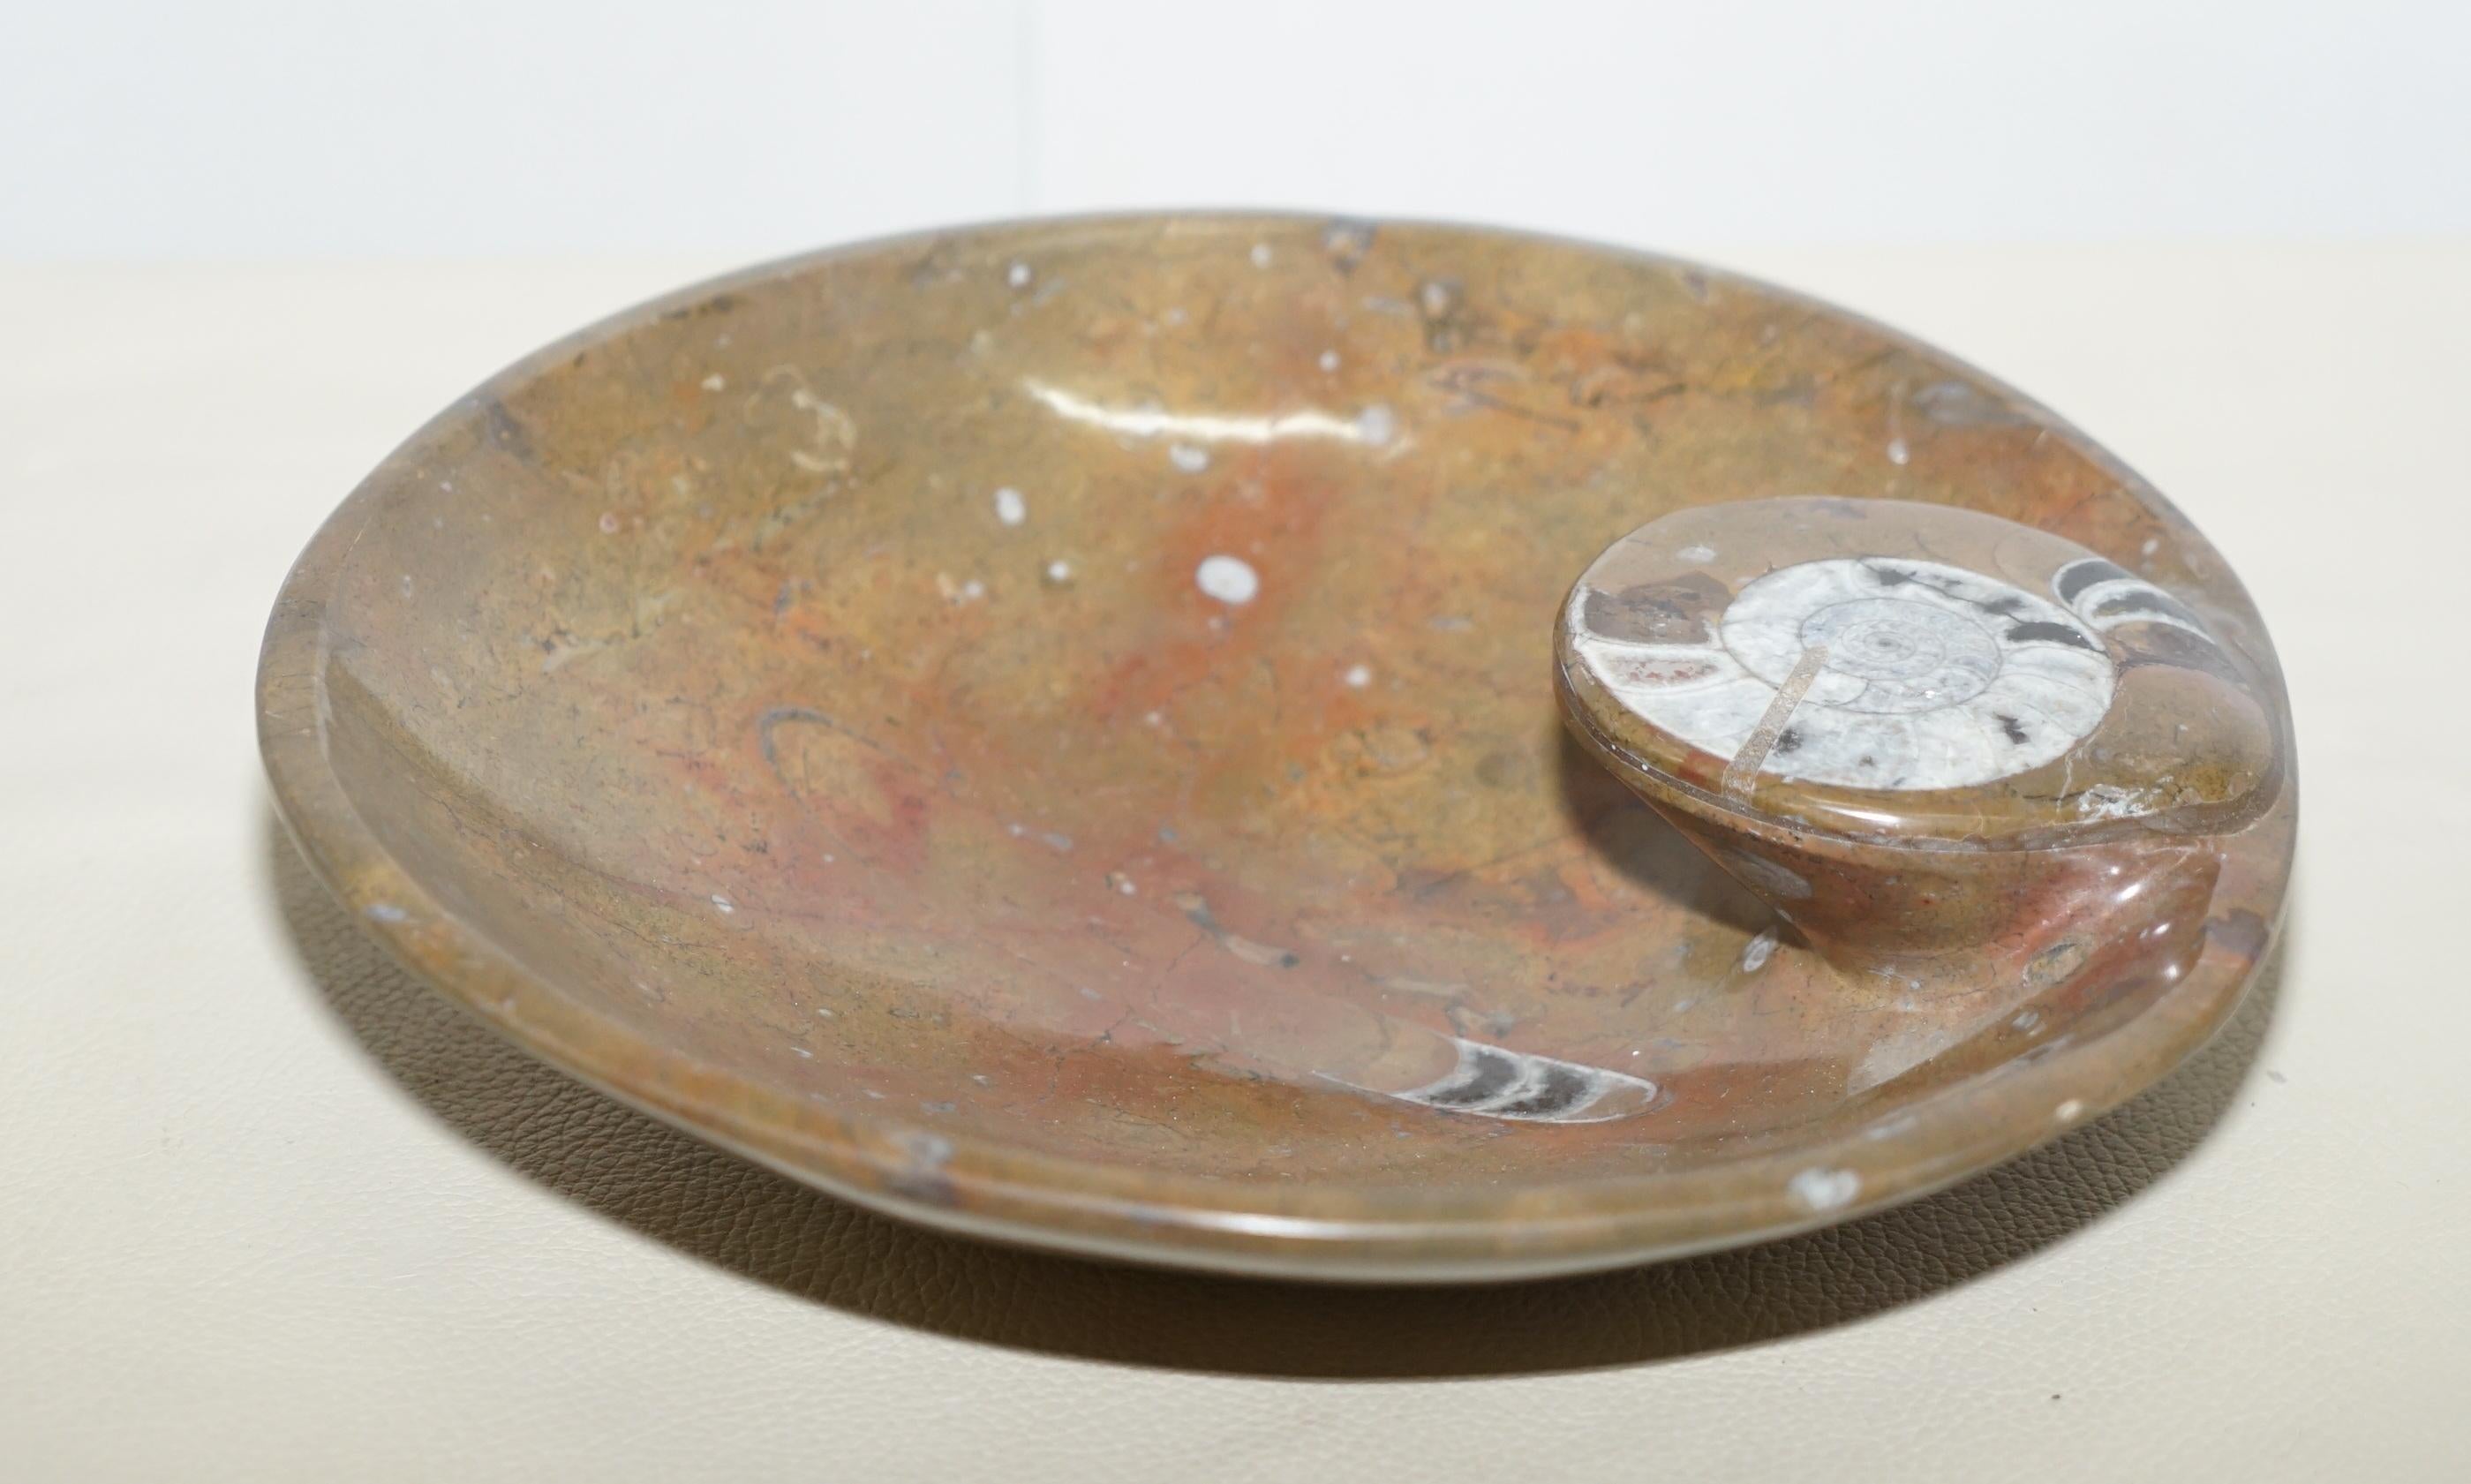 We are delighted to offer this sublime original circa 180+ Million year old Atlas Mountains Morocco Fossil bowl polished to a marble finish

They are truly exquisite, they each have one large fossil to the top and various fossils throughout the